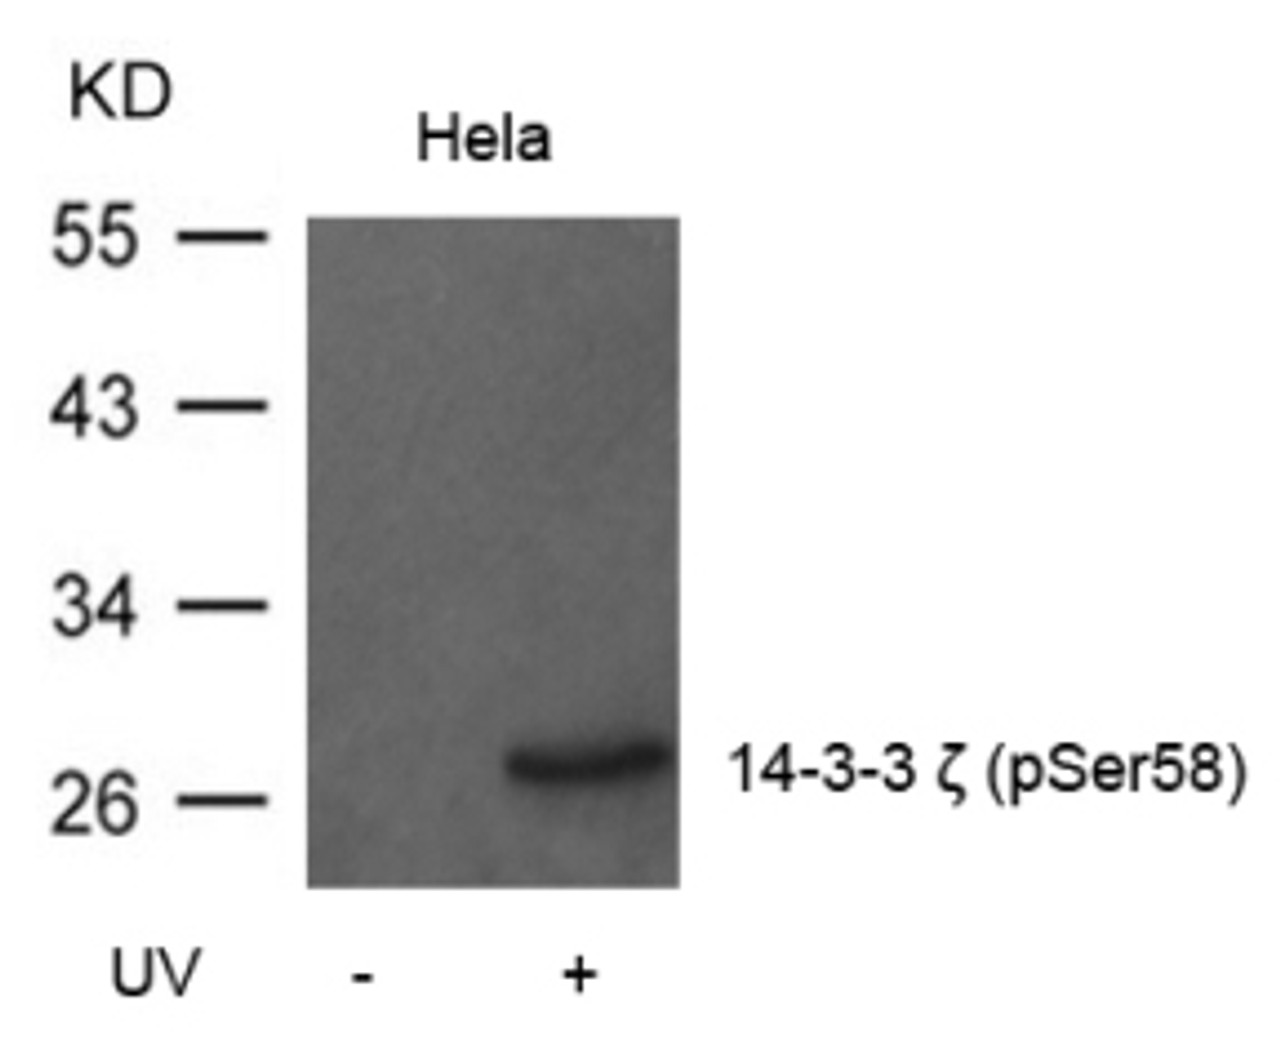 Western blot analysis of lysed extracts from HeLa cells untreated or treated with UV using 14-3-3 zeta (Phospho-Ser58) .